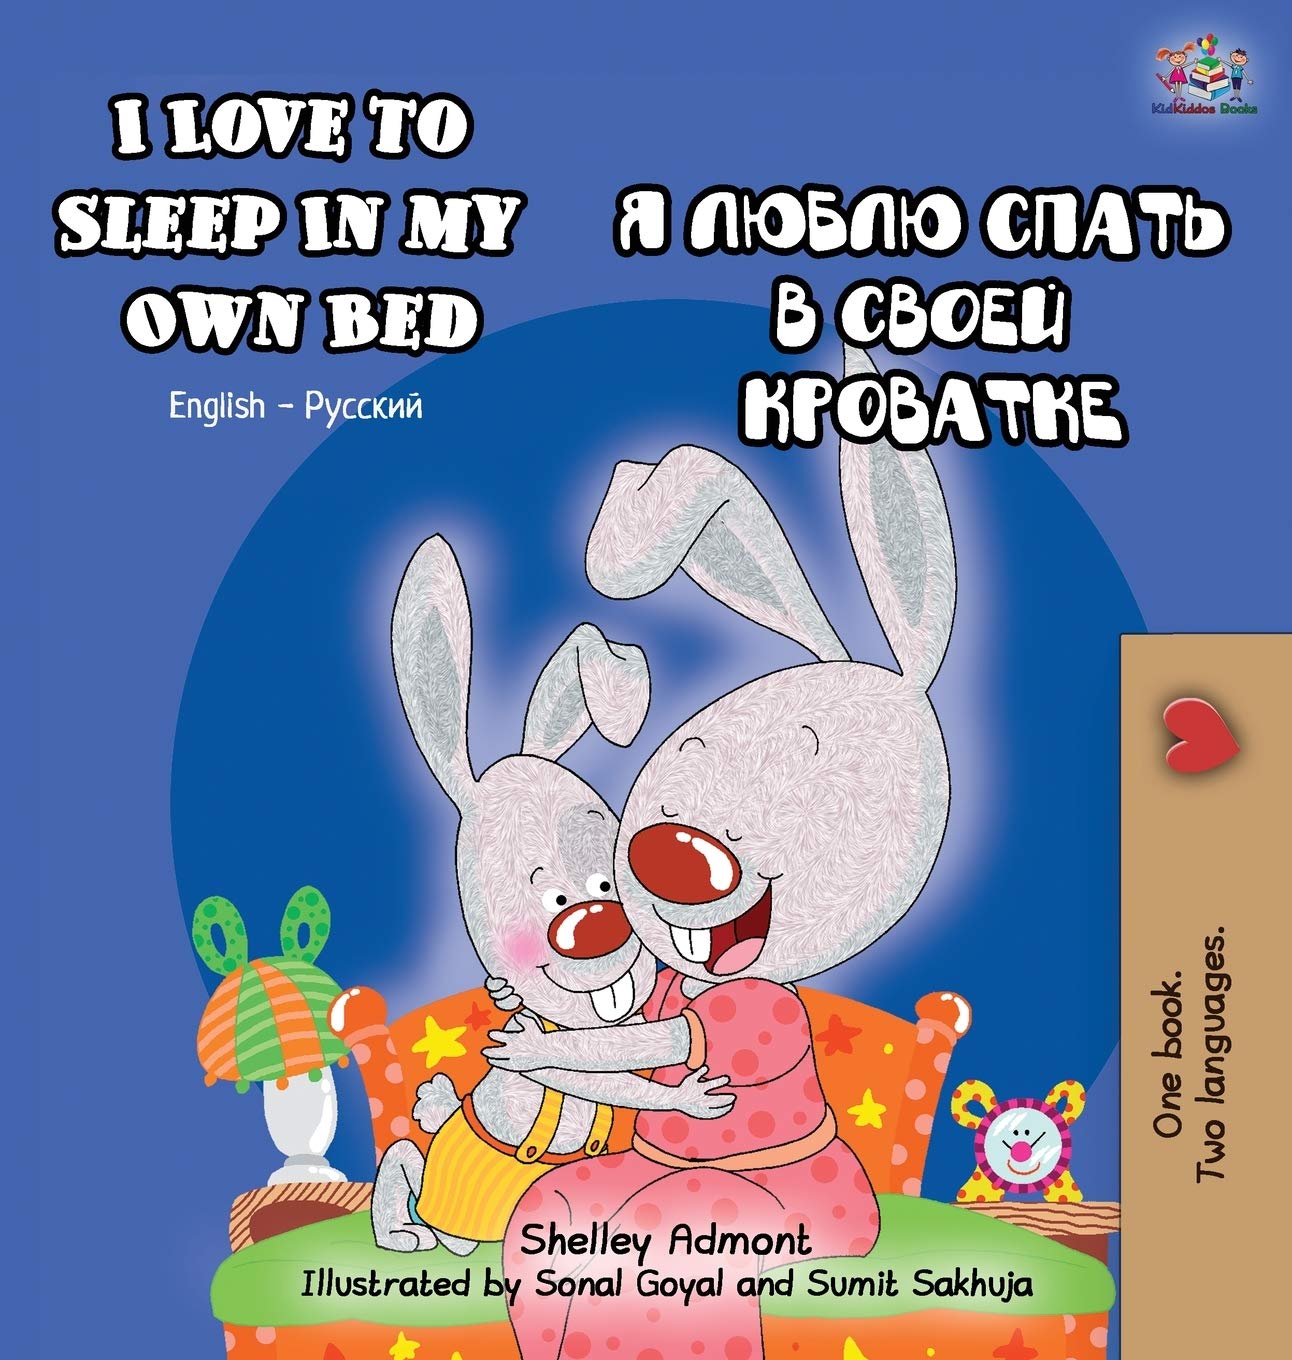 I Love to Sleep in My Own Bed: English Russian Bilingual Edition (English Russian Bilingual Collection) (Russian Edition)